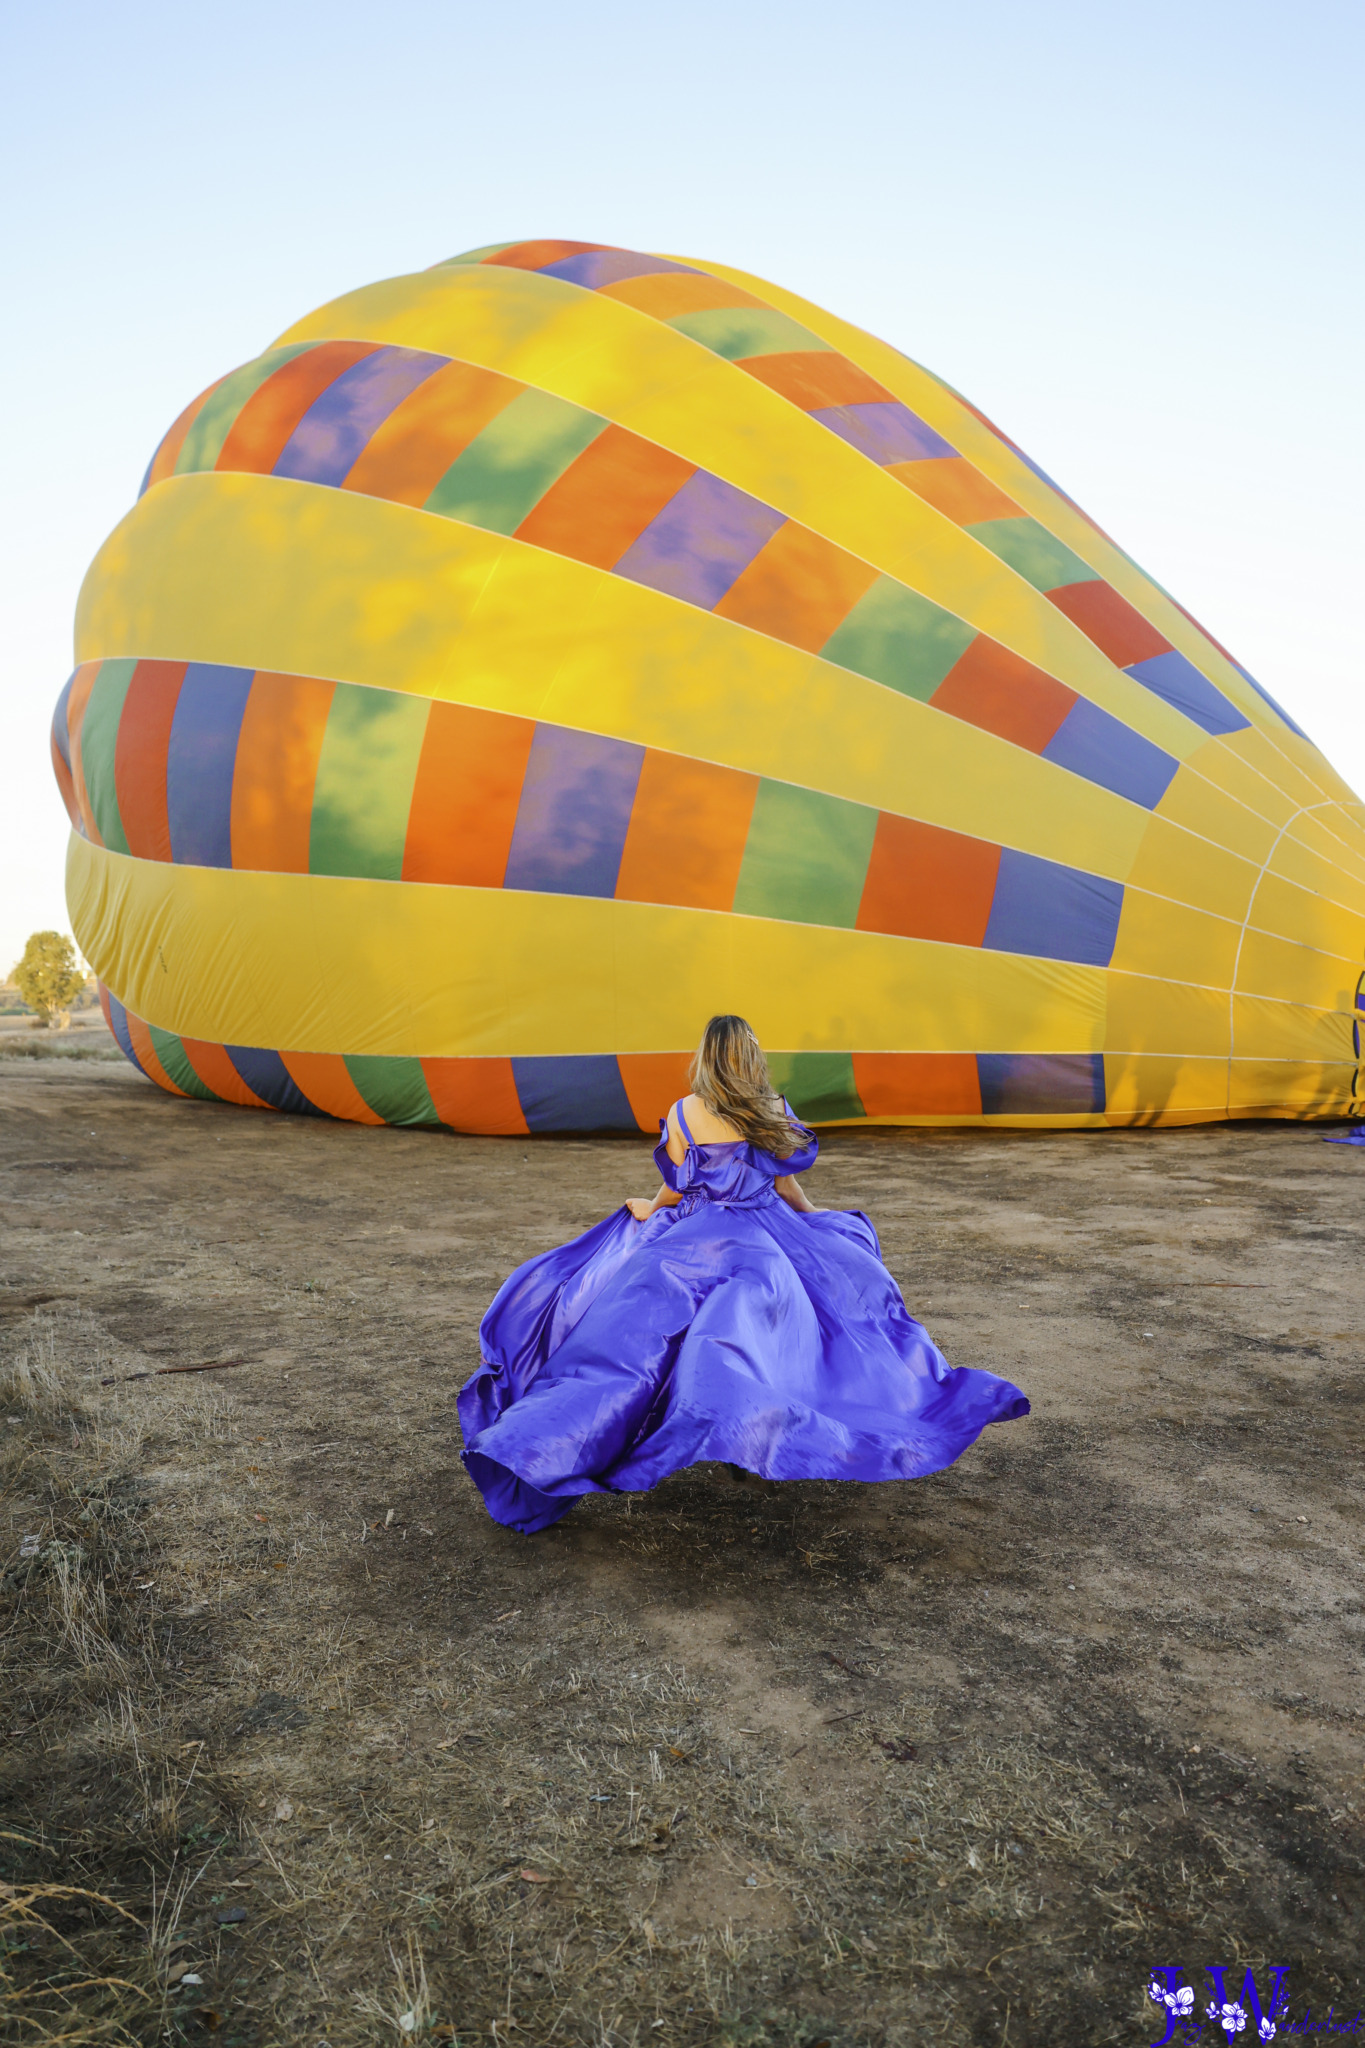 Hot air balloon experience in Temecula. Photography by Jaz Wanderlust.